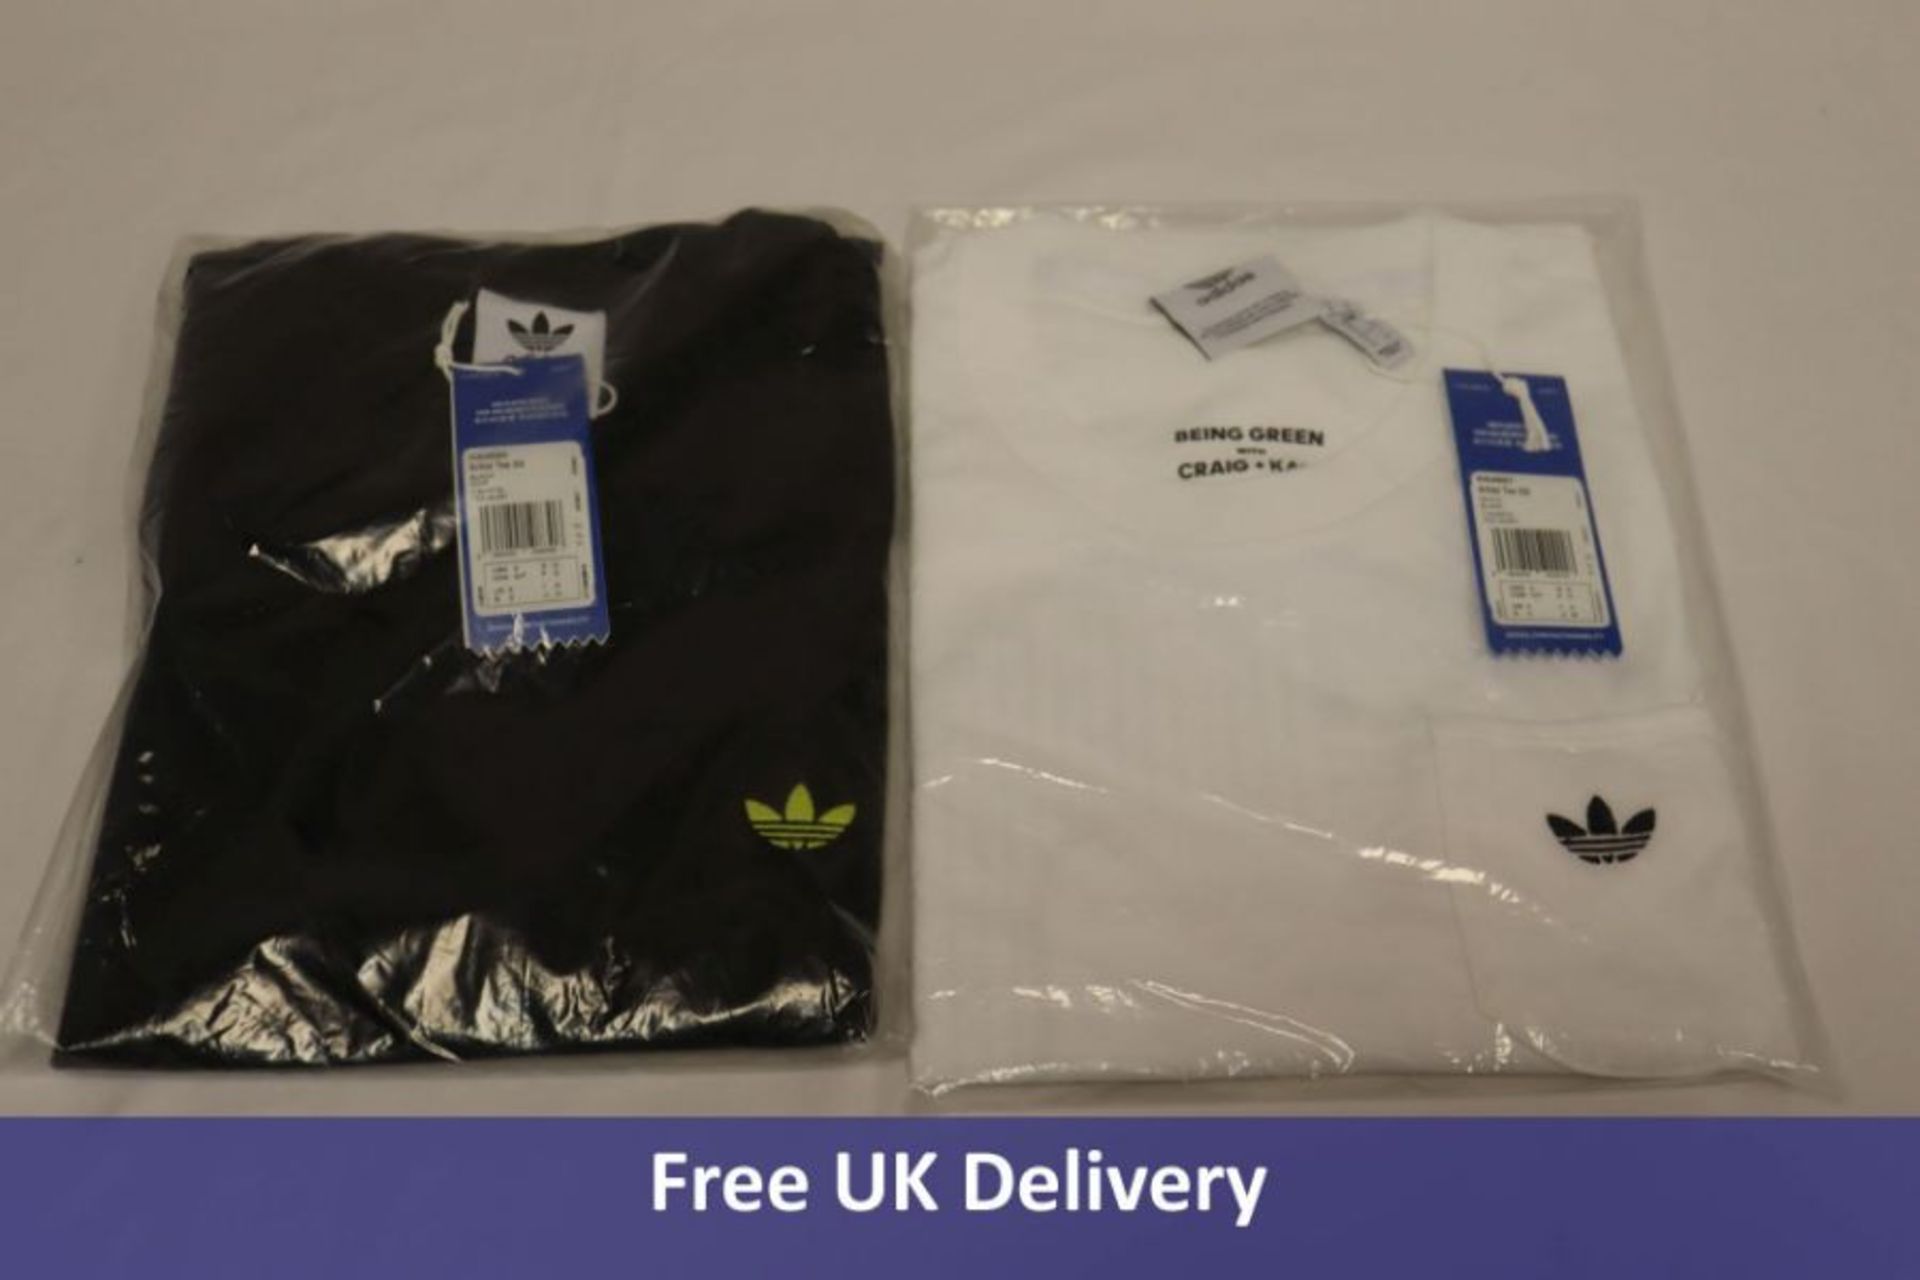 Two Adidas Men's Artist T-Shirts to include 1x White, Small, HA4691, 1x Black, Small, HA4690